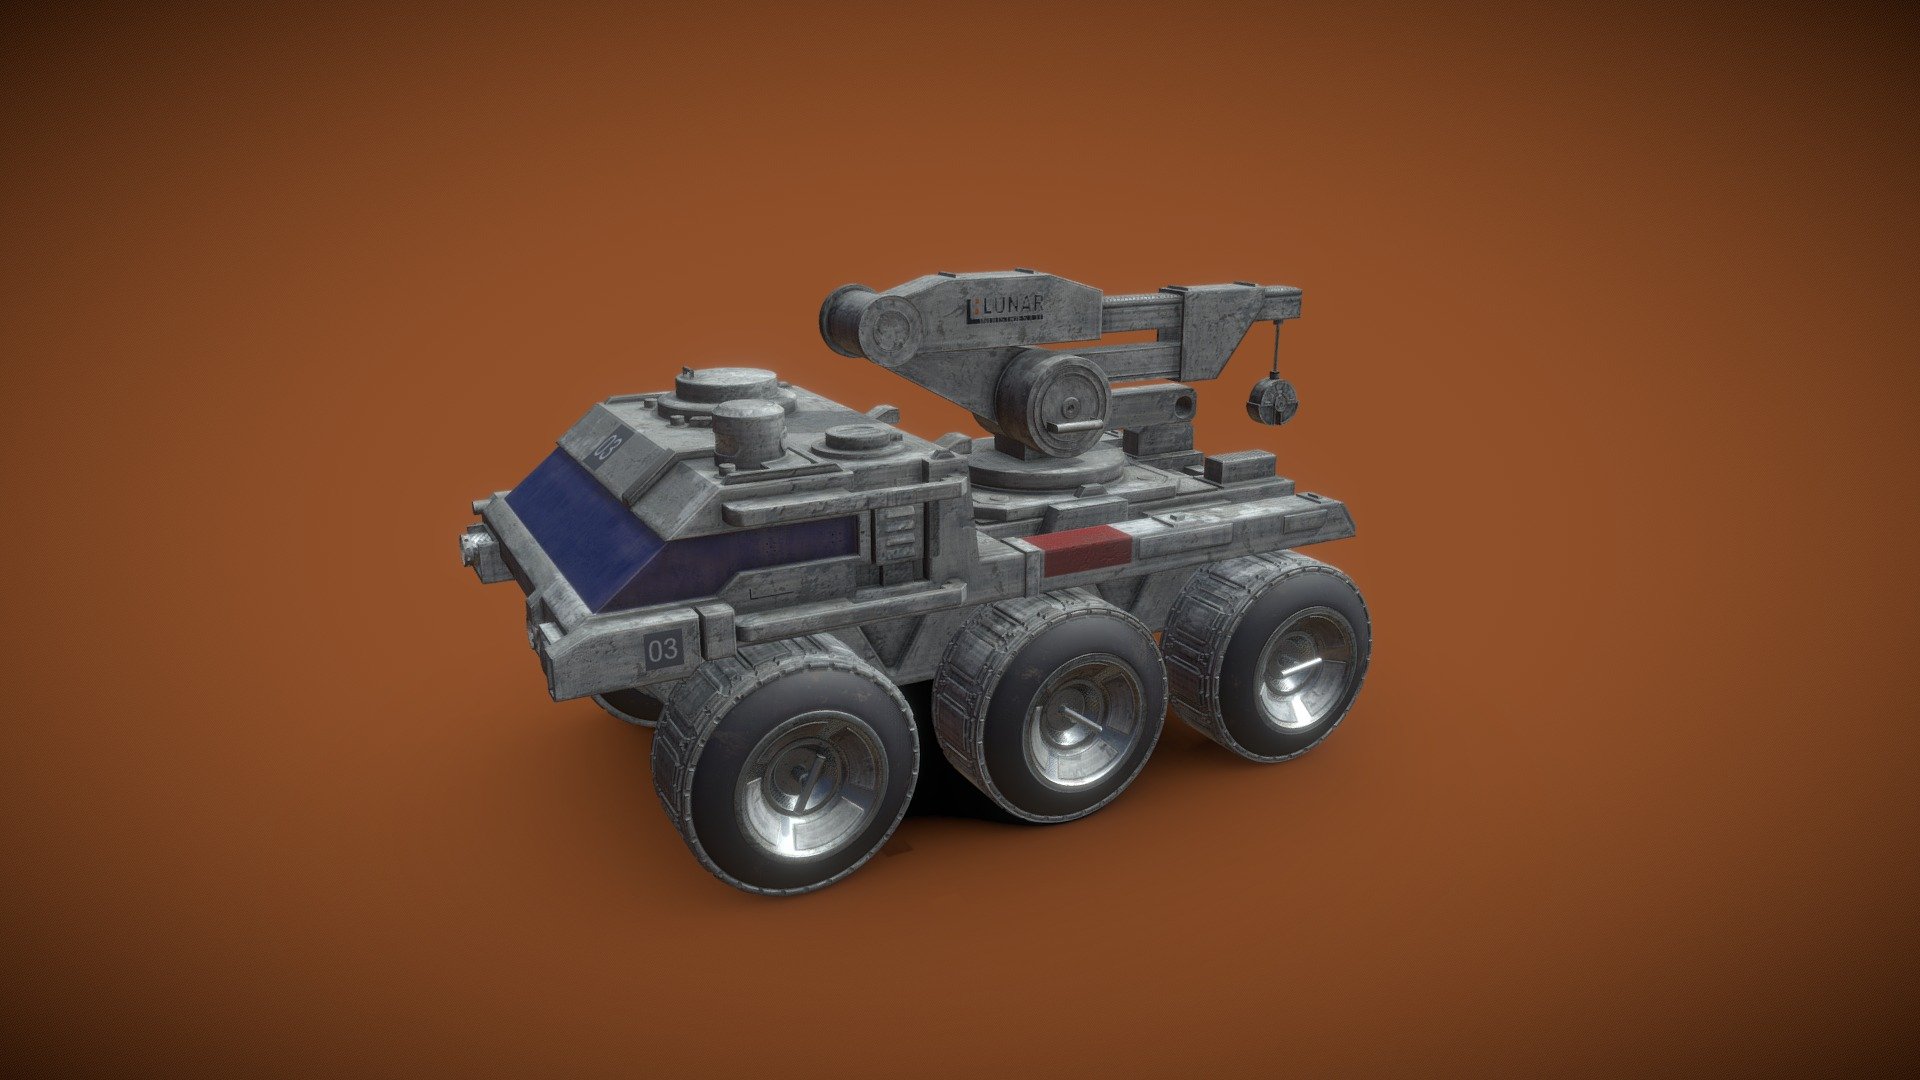 I modeled one of the lunar rovers from the film 